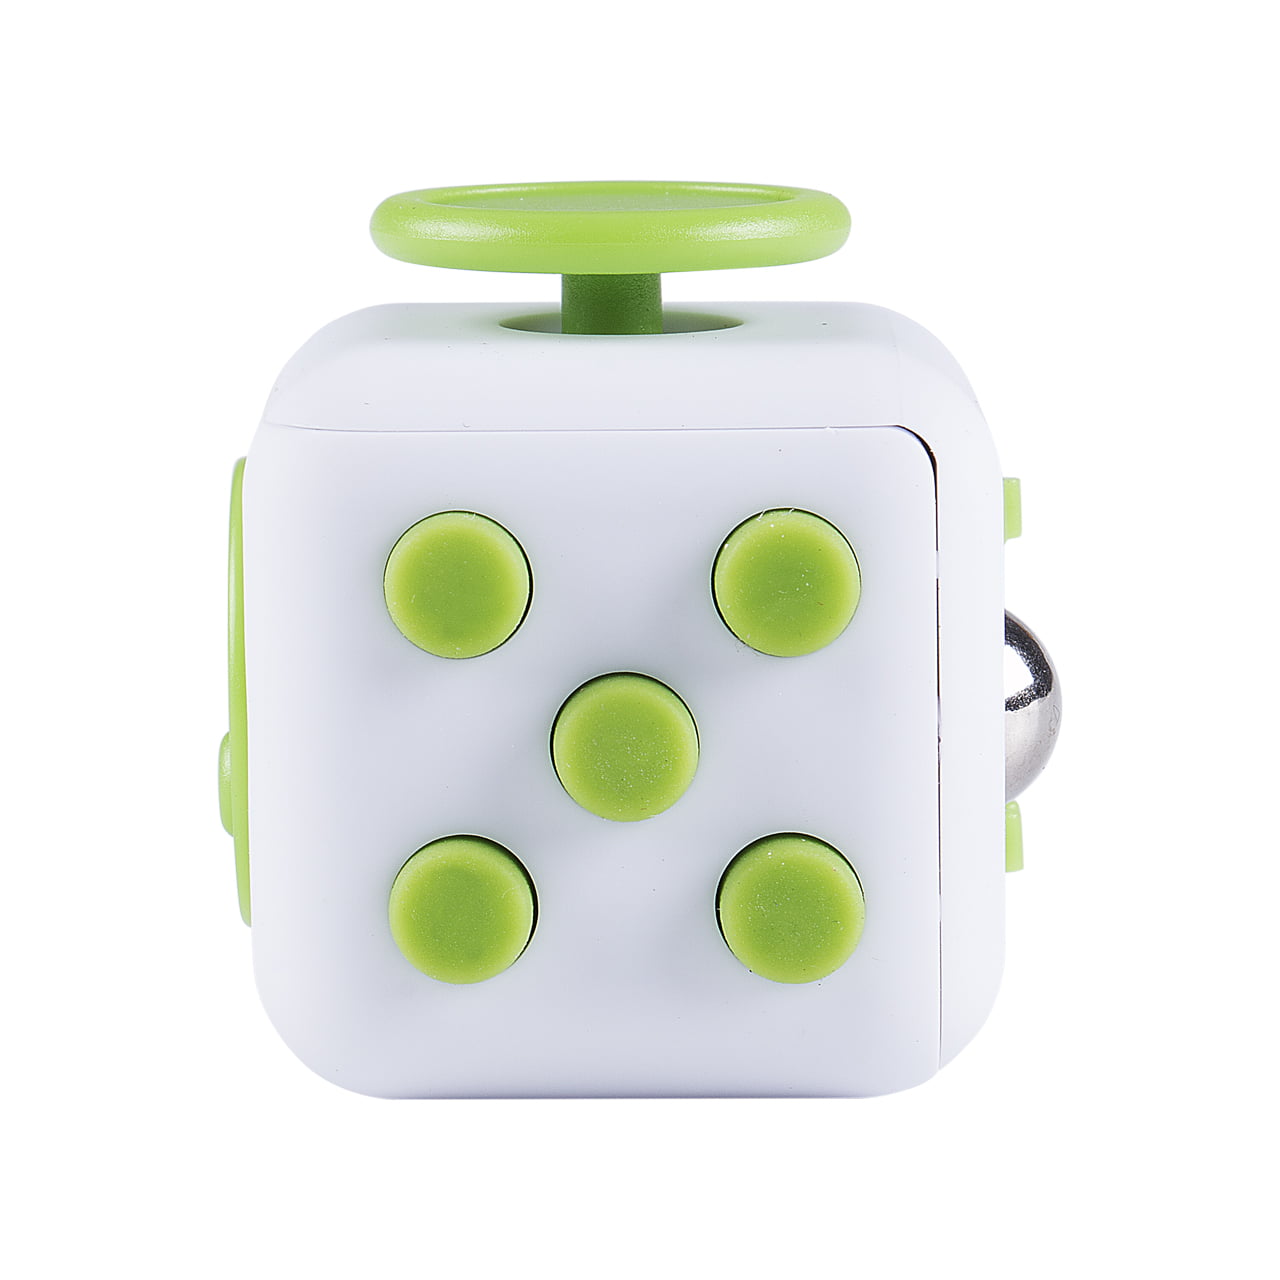 Fidget Cube Desk Toy Stress Anxiety Relief Focus Puzzle Adult Children 6 Side